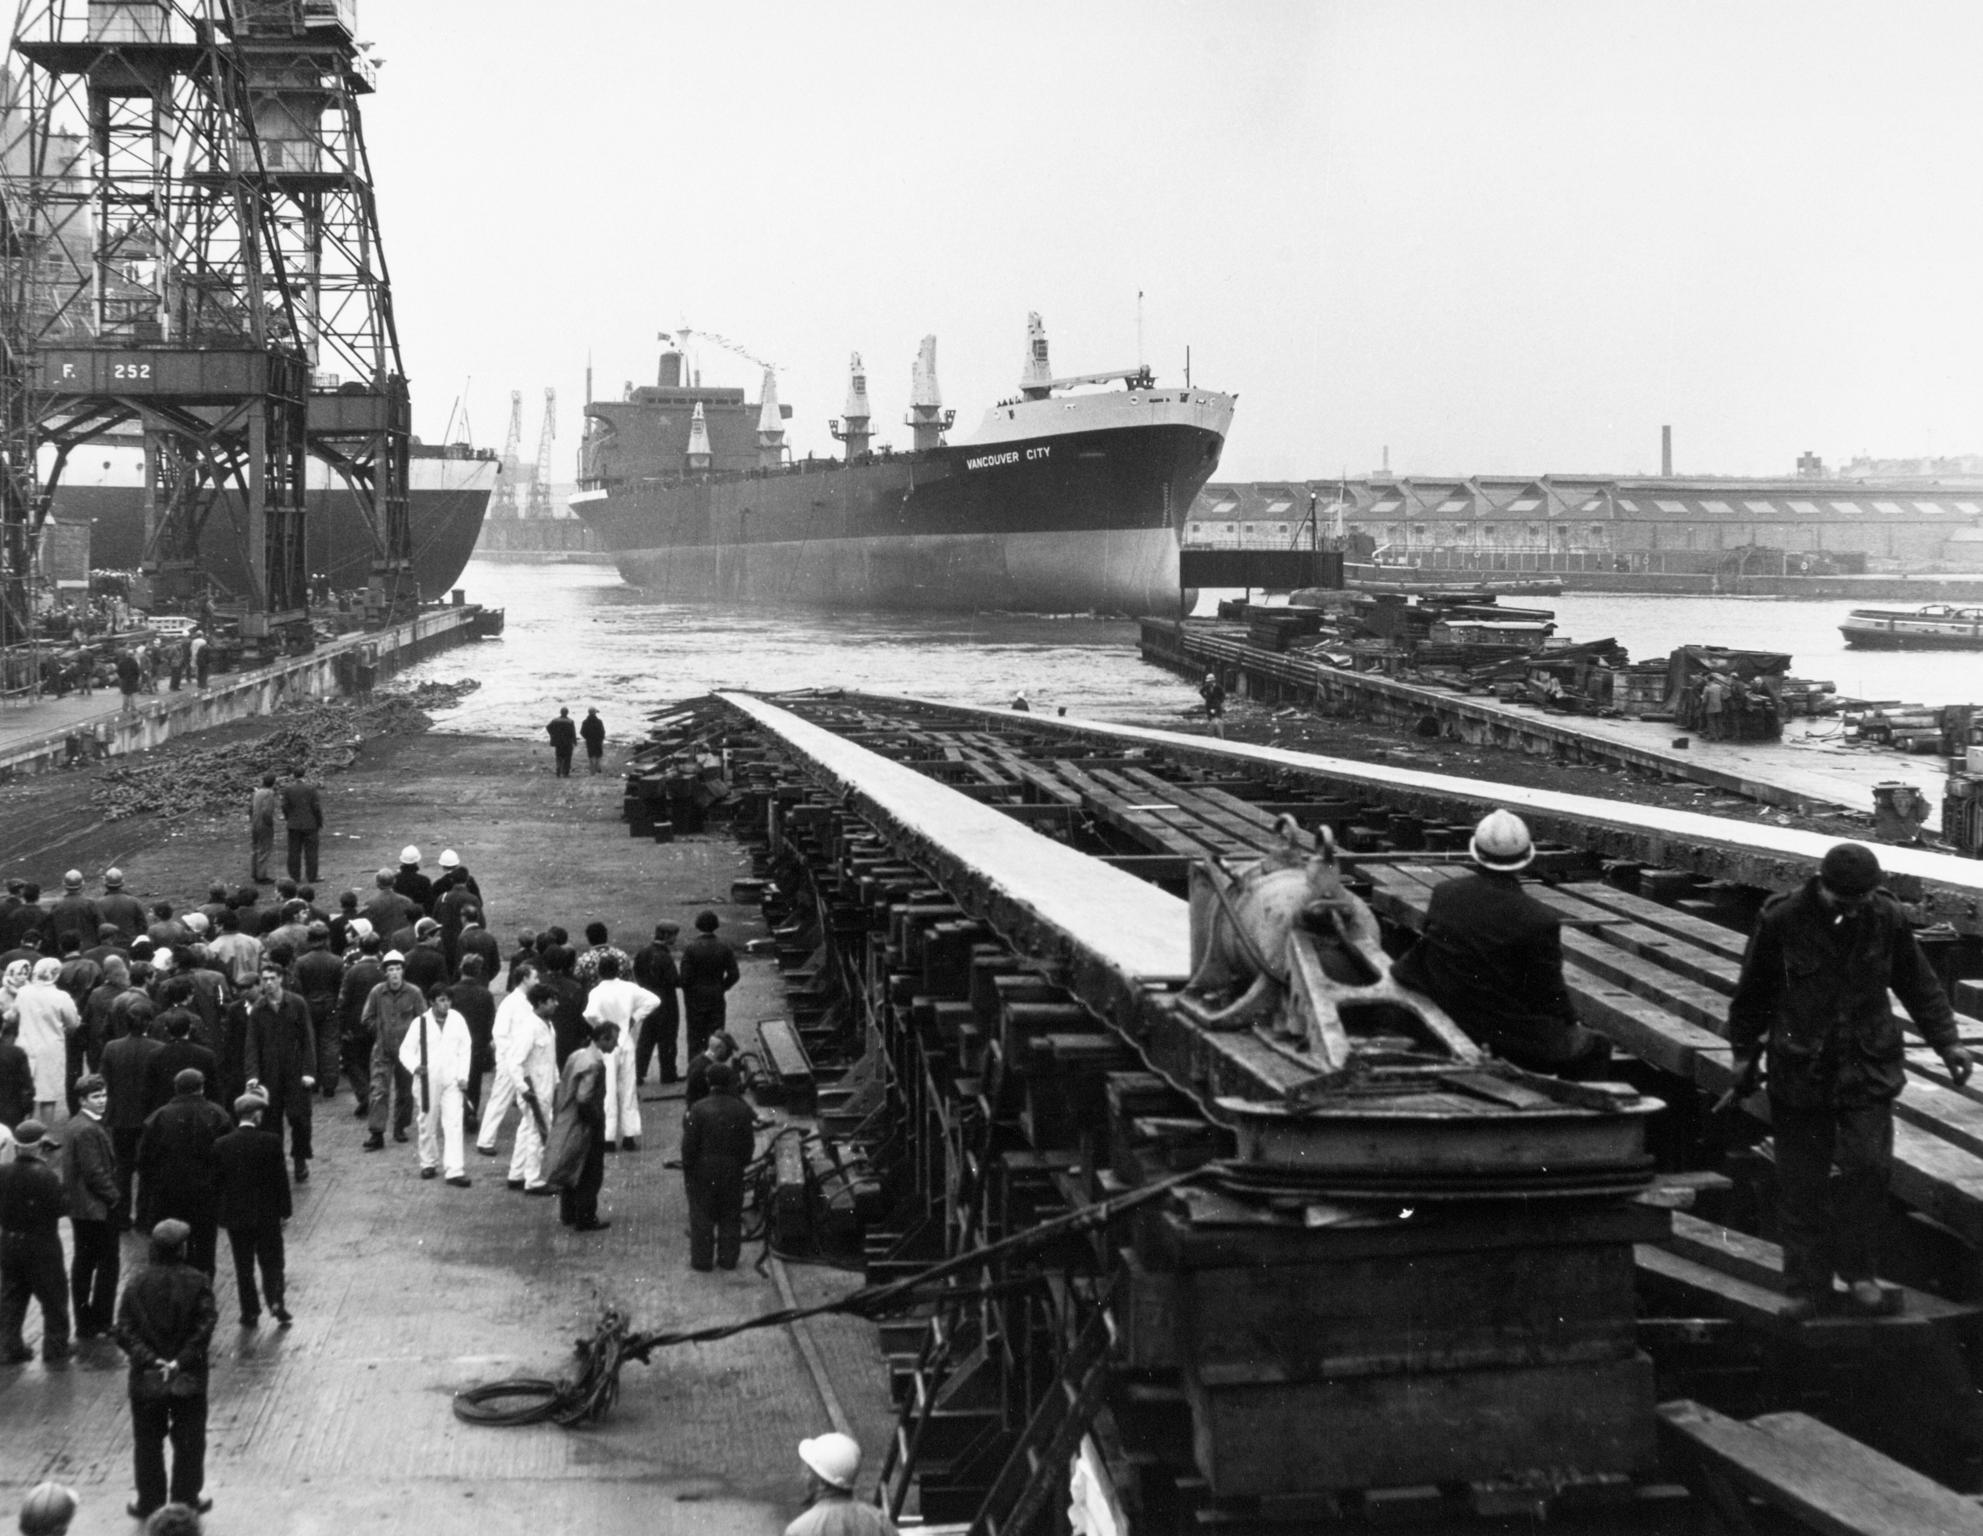 Launch of M.V. VANCOUVER CITY, photograph